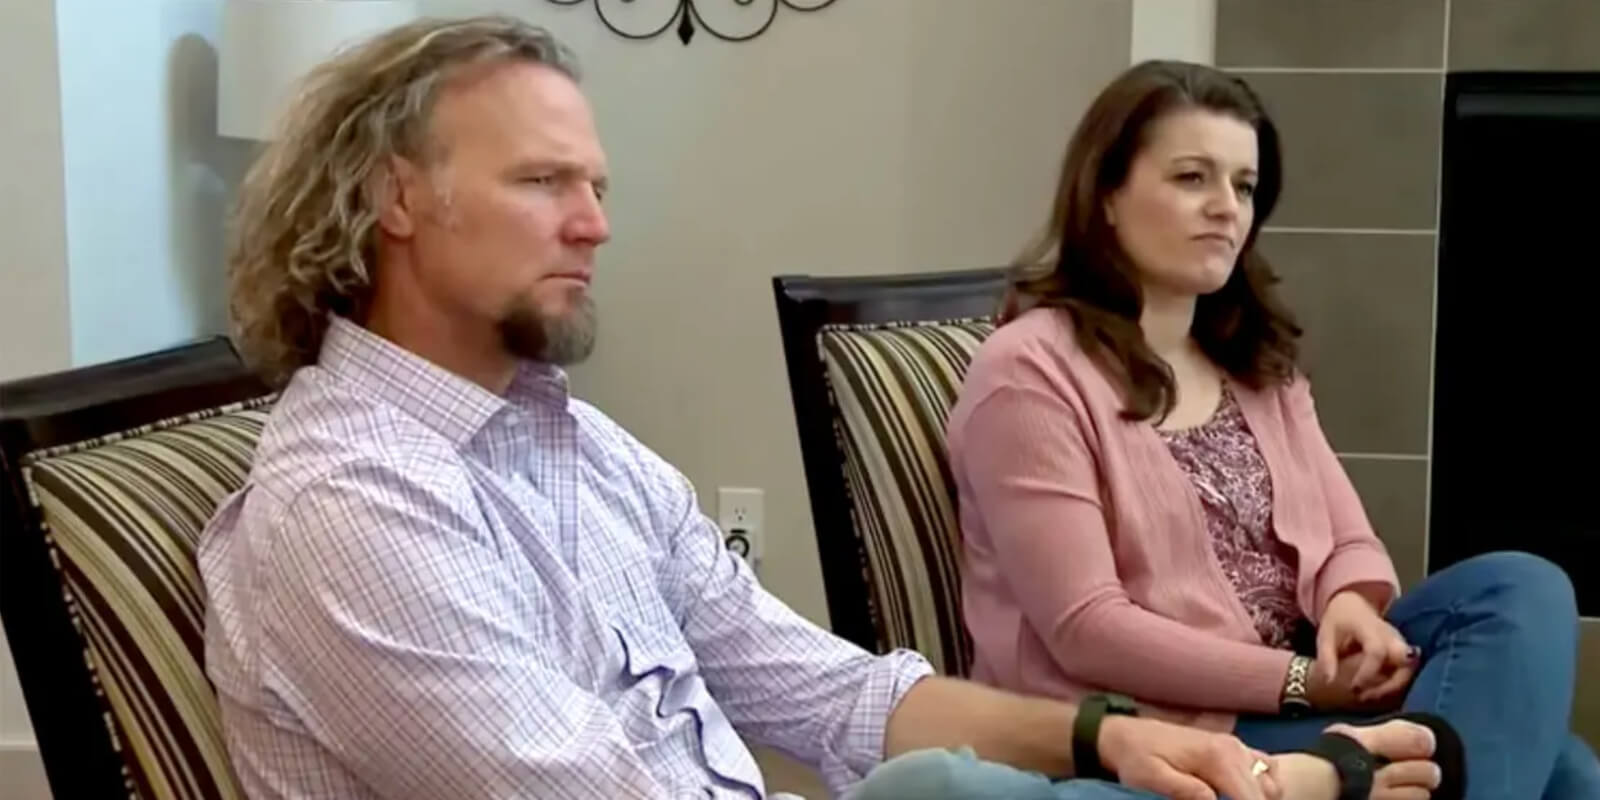 Kody and Robyn Brown are seated together in a scene from TLC's 'Sister Wives.'